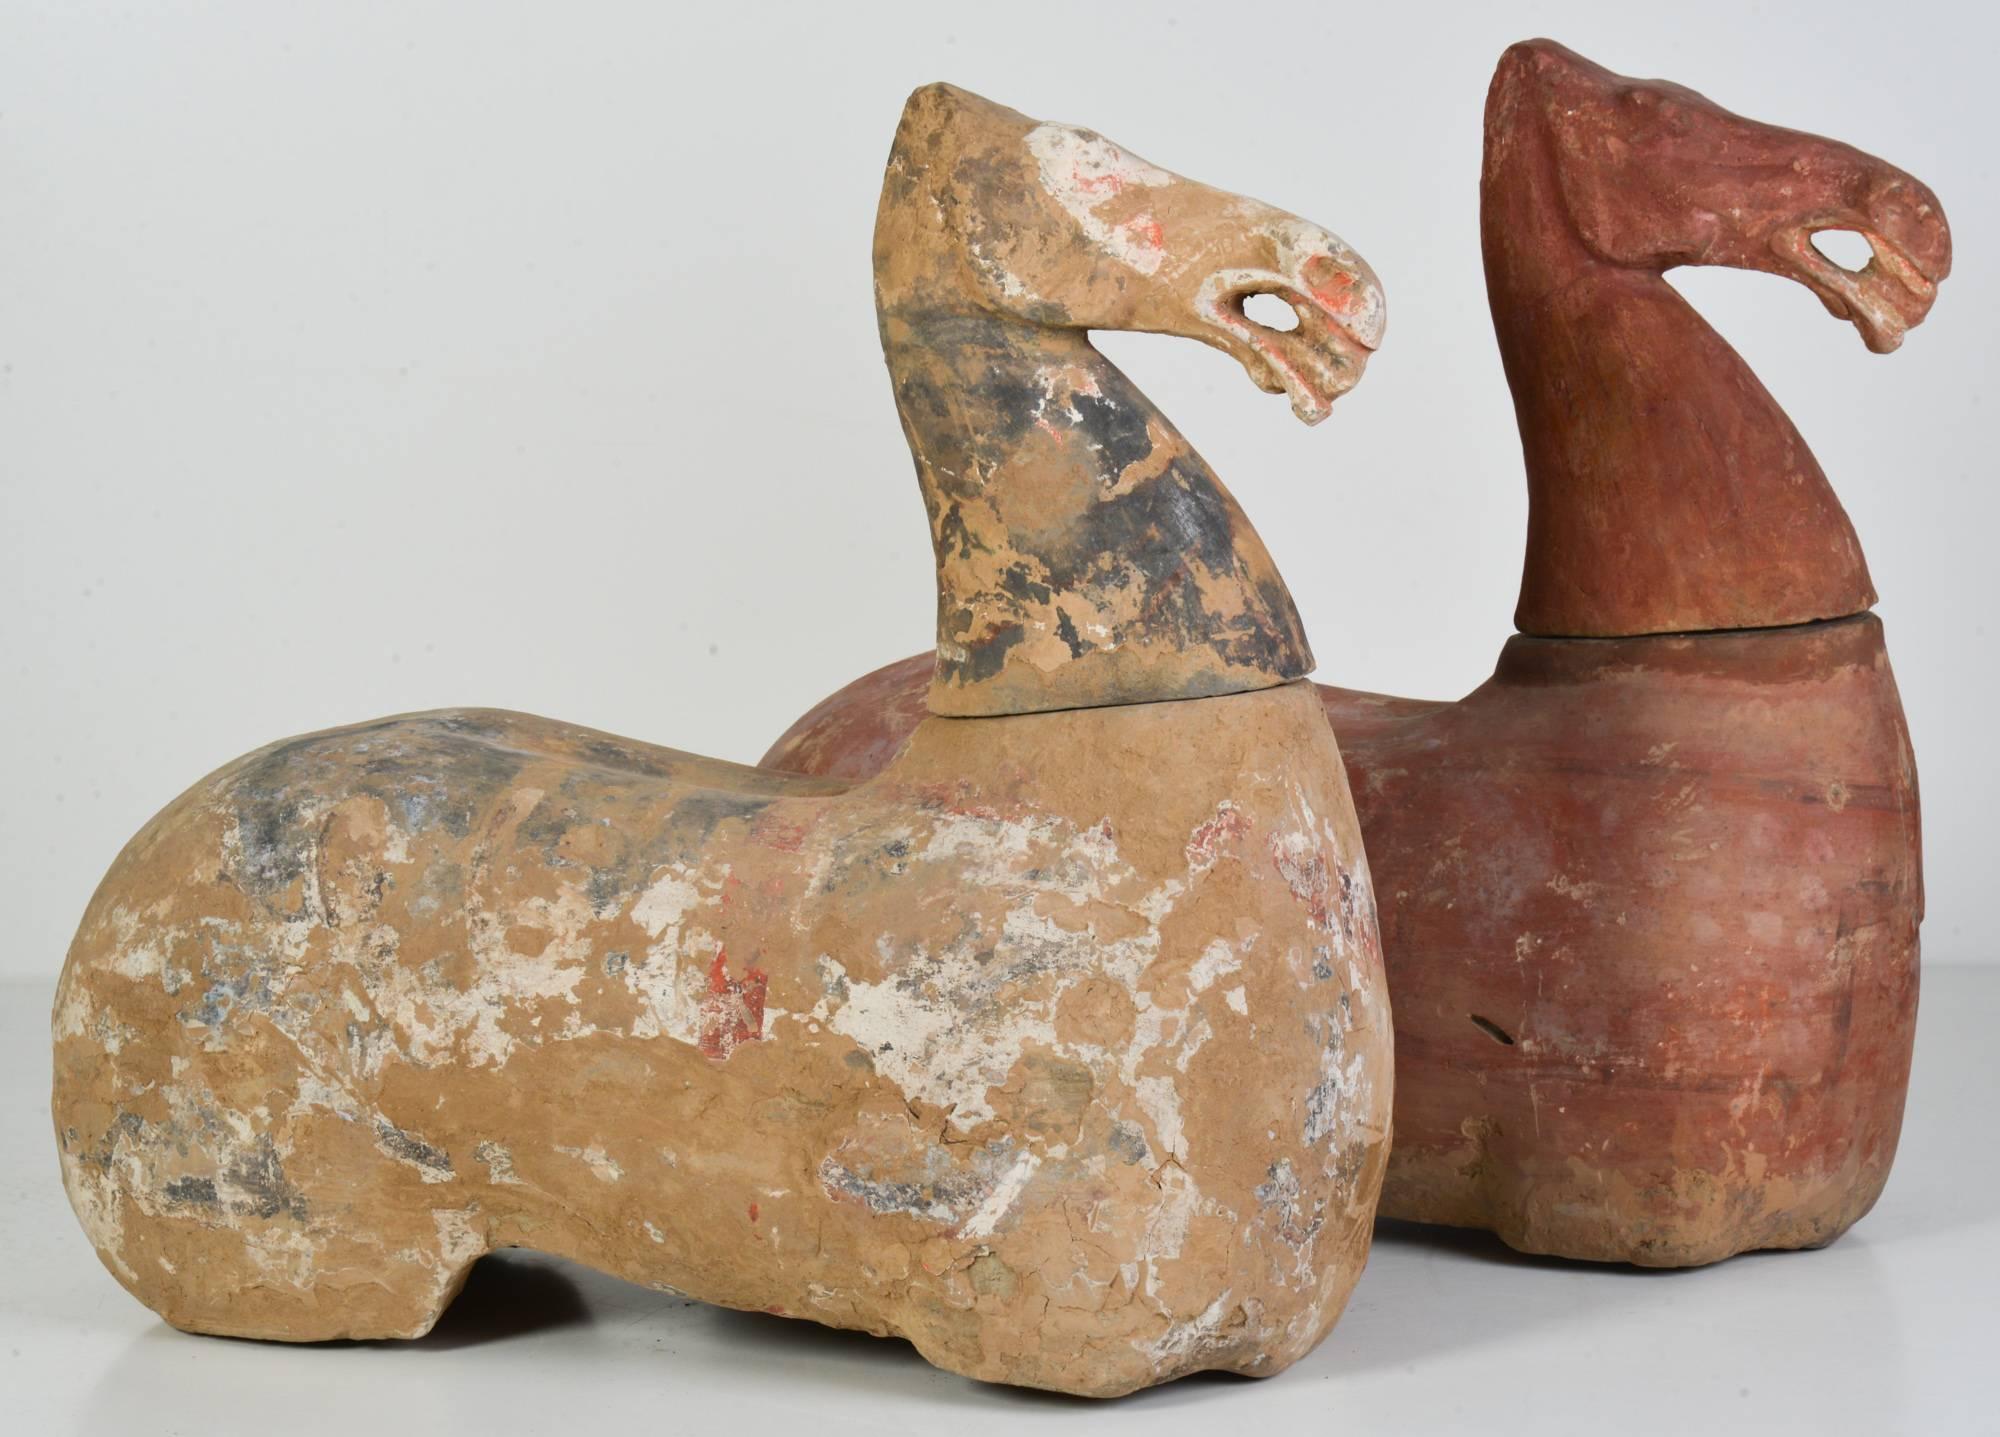 Imposing large pair of excavated original terracotta horses of the Han dynasty (206 B.C.-220 A.D.), retaining much of the original pigment. Artifacts were buried for thousands of years and then unearthed, which helped to naturally preserve the